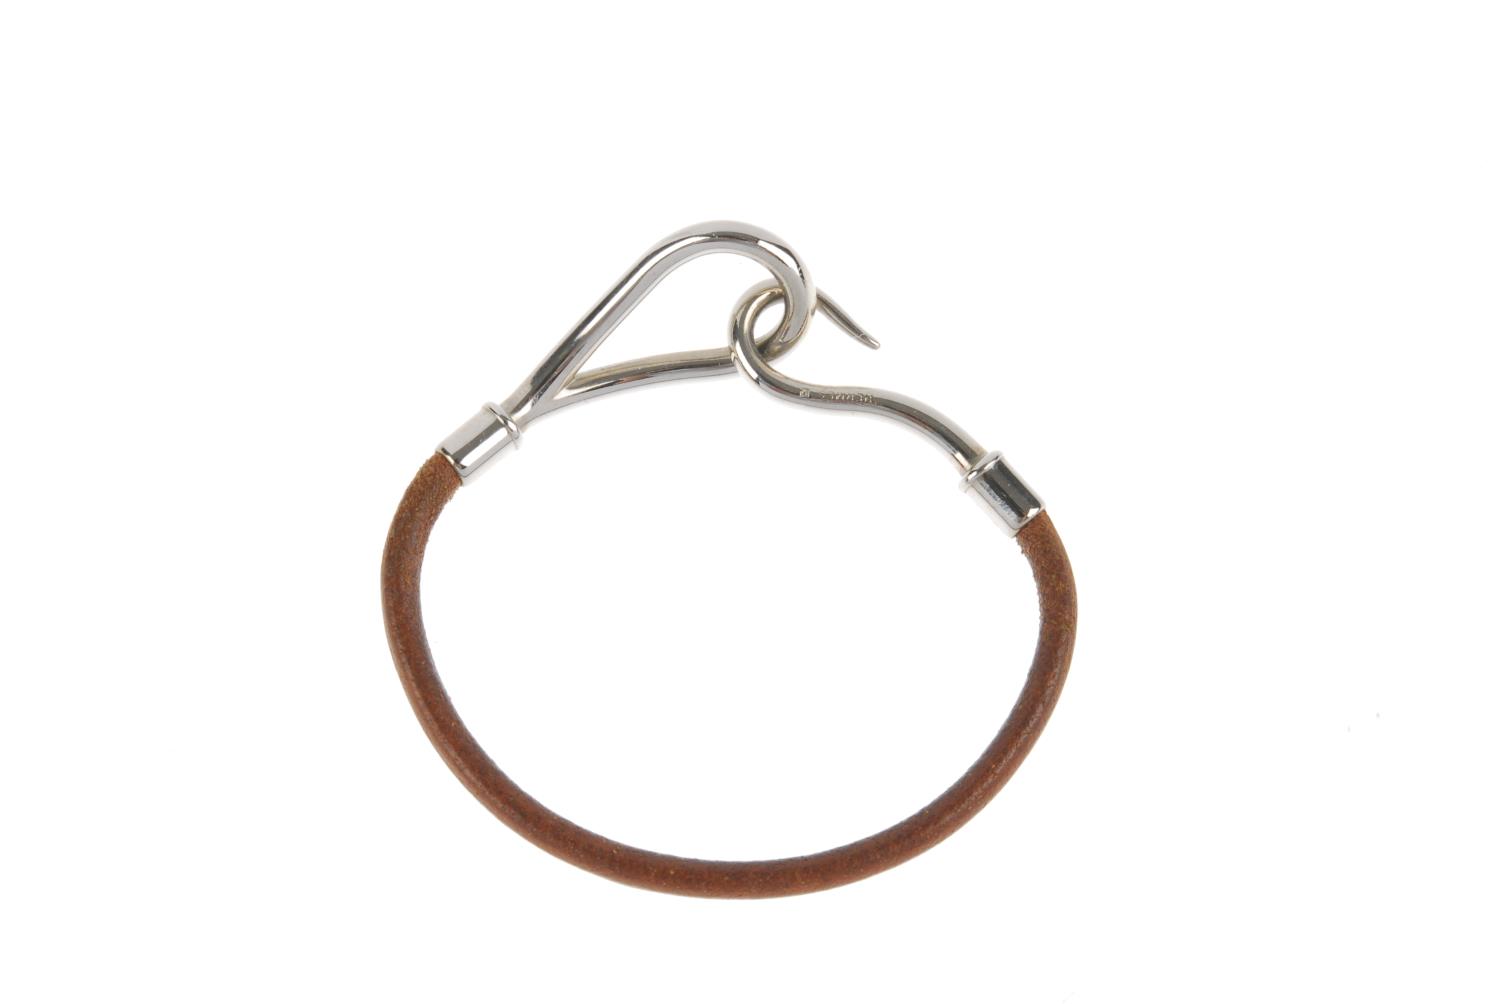 HERMÈS - a leather cord bracelet. The brown leather cord, with hook to one terminal and loop to - Image 2 of 3